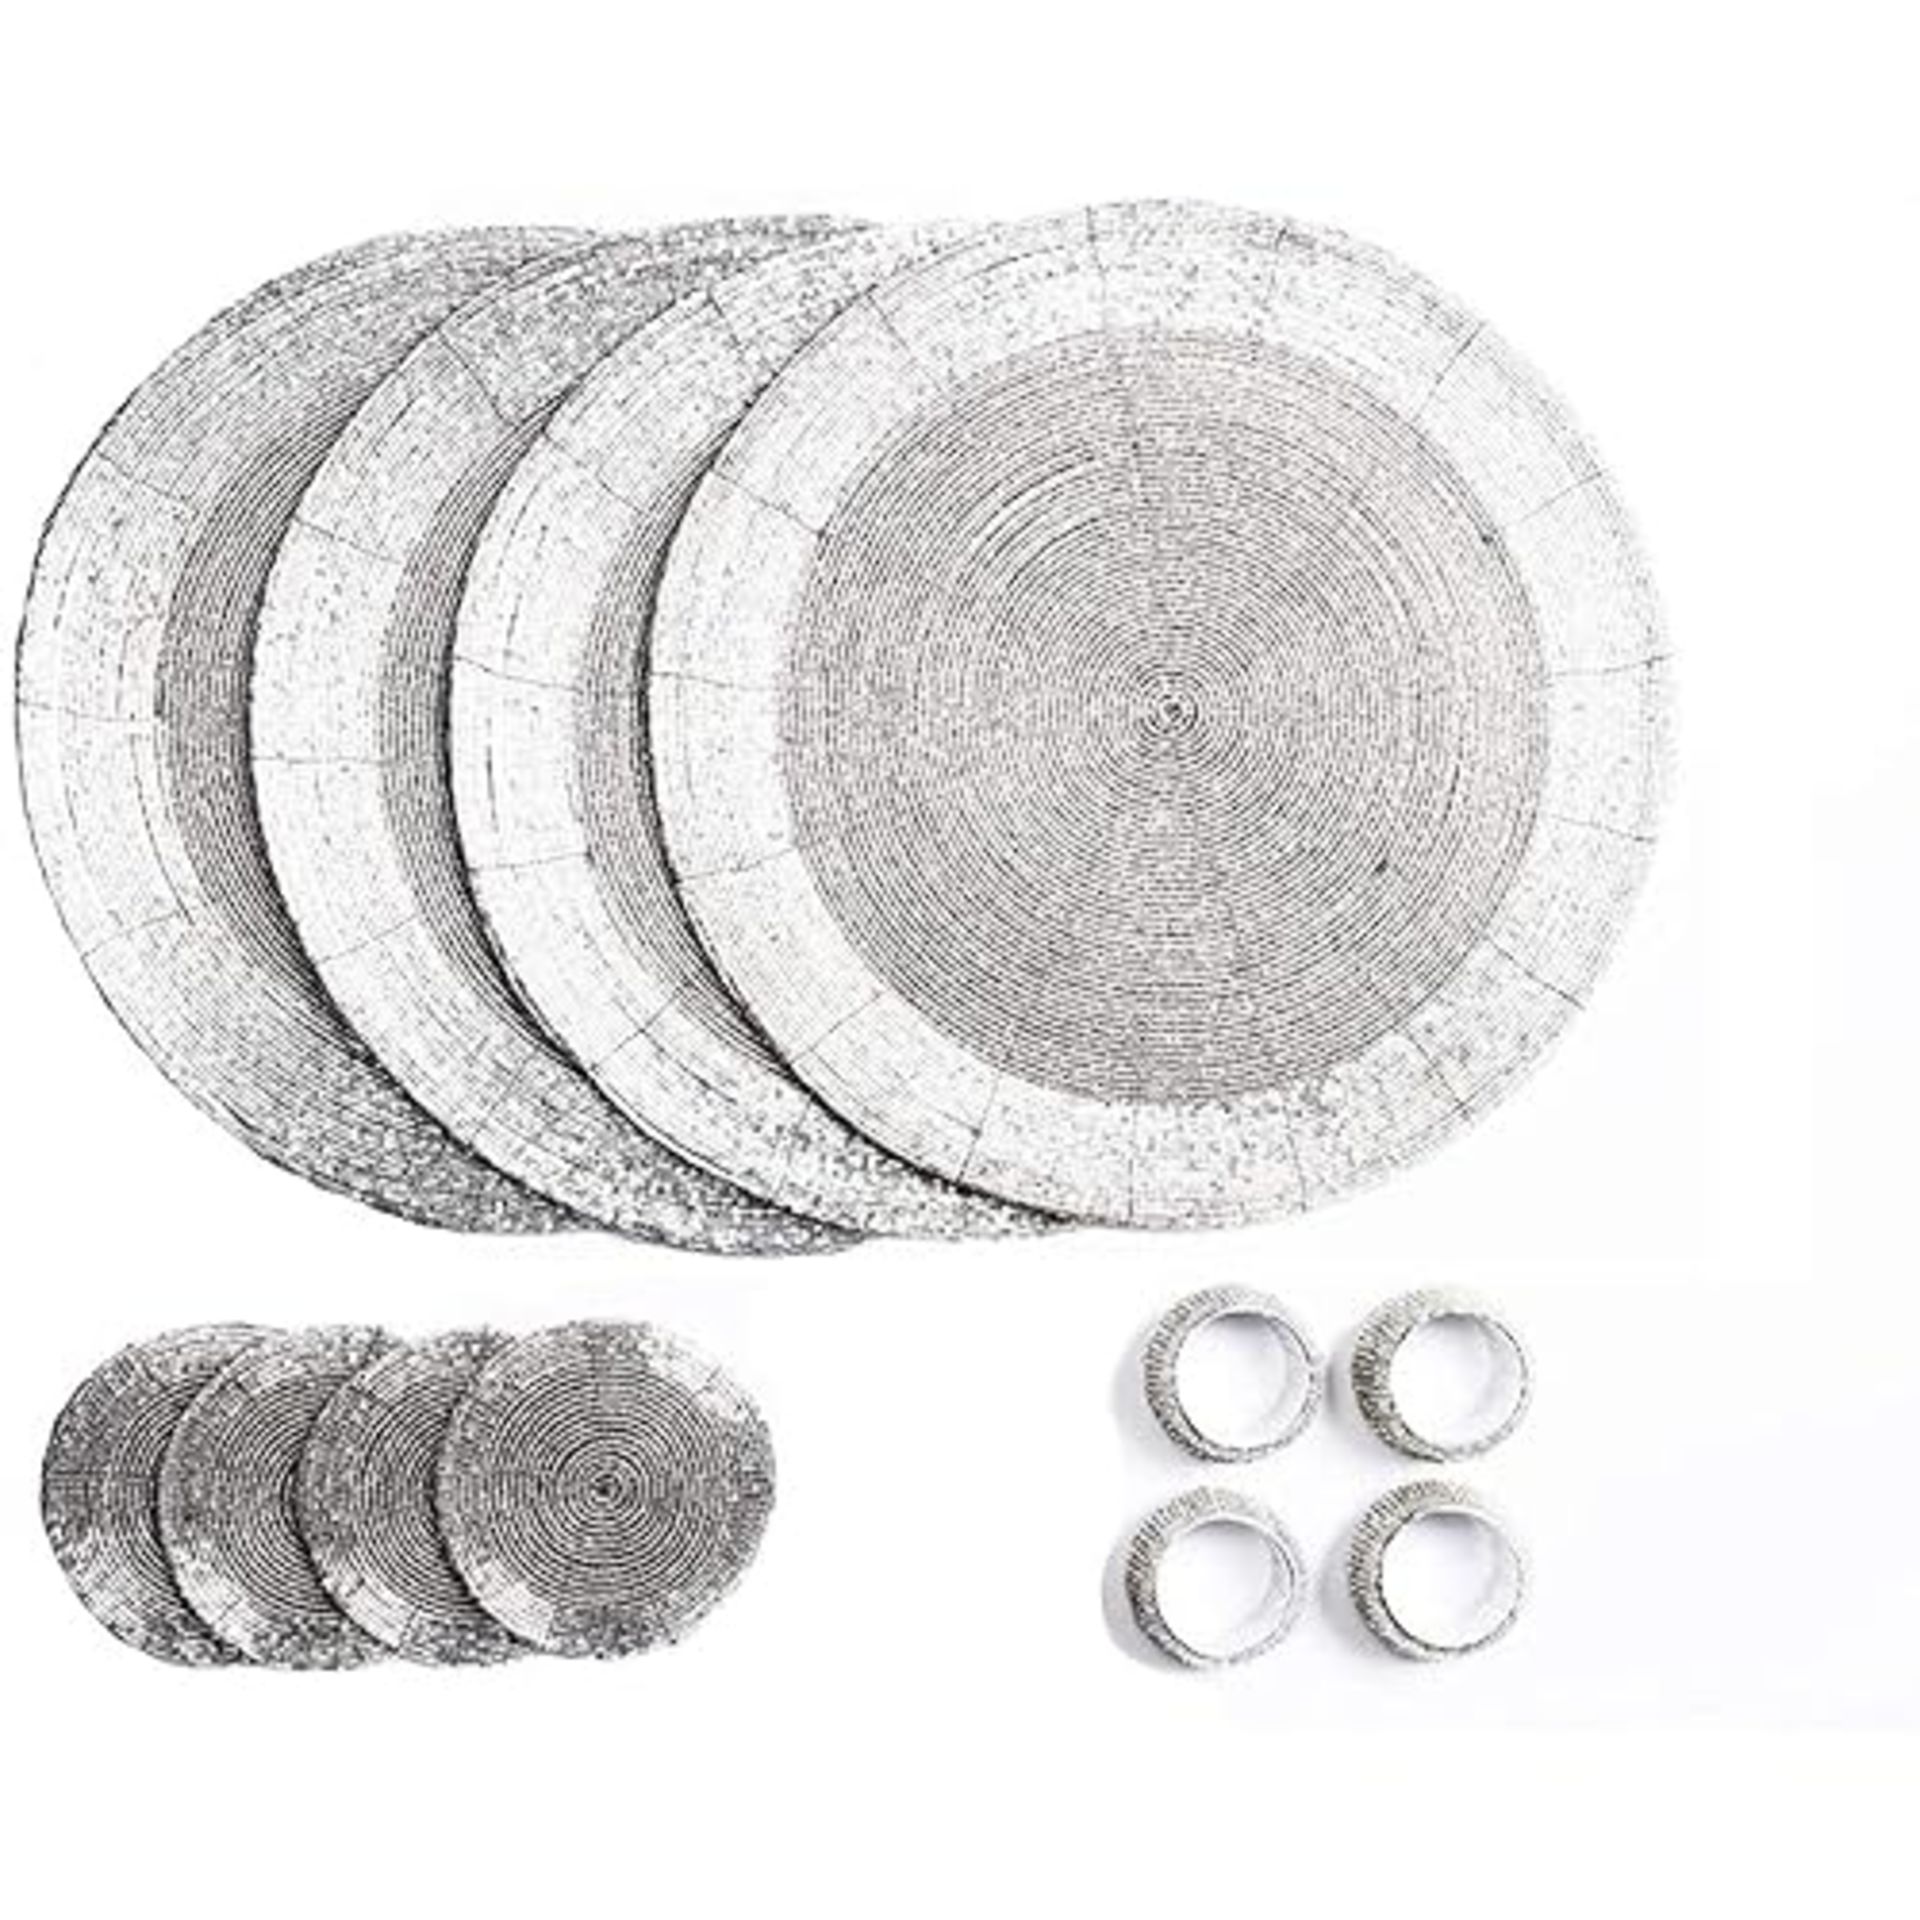 Penguin Home Set Handcrafted Glass Beaded Placemats, Coasters and Napkin Rings in Silver Colour - O